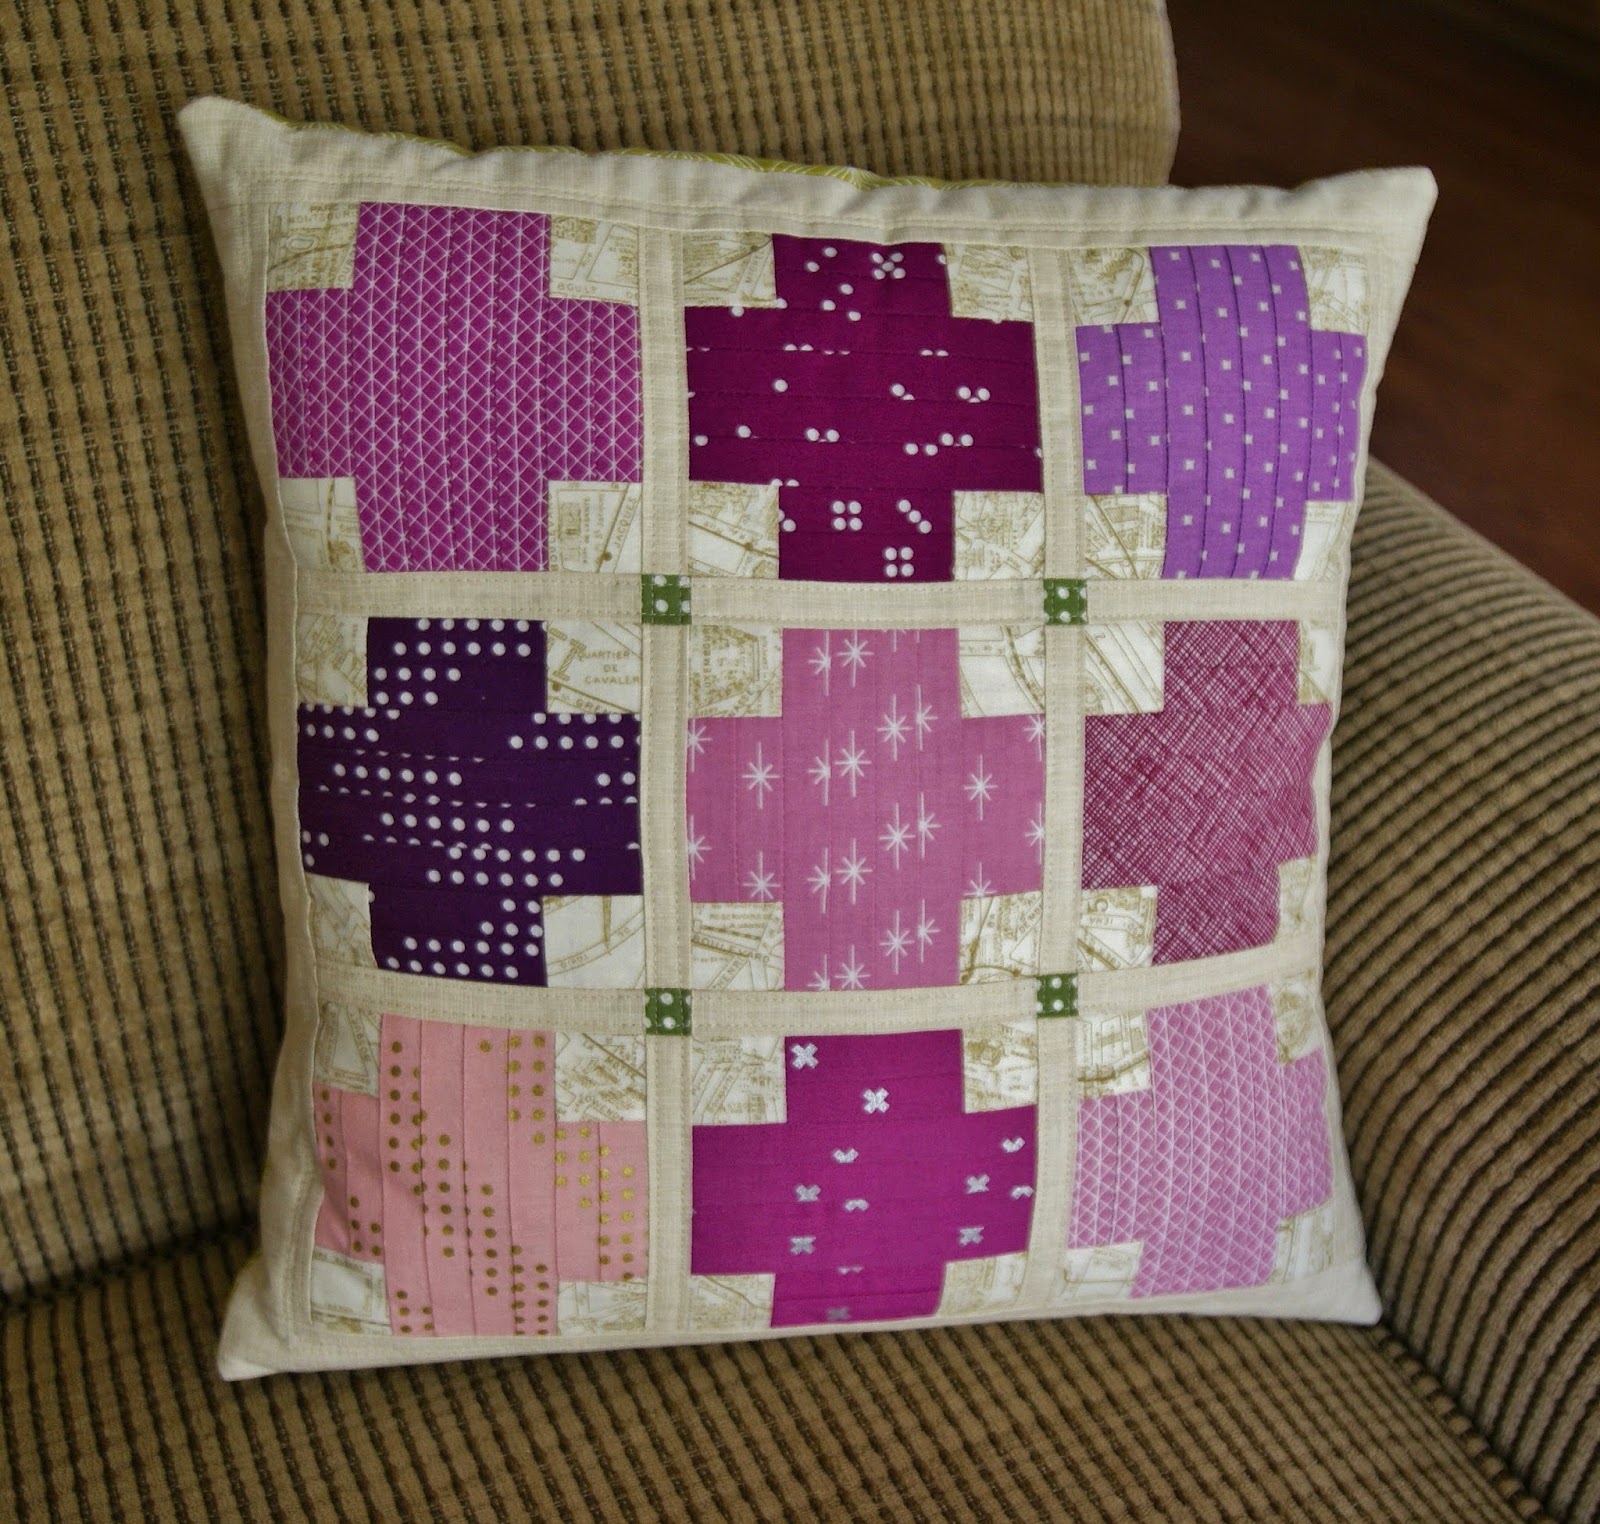 Quilt Color Workshop Parquet Pillow by Heidi Staples of Fabric Mutt